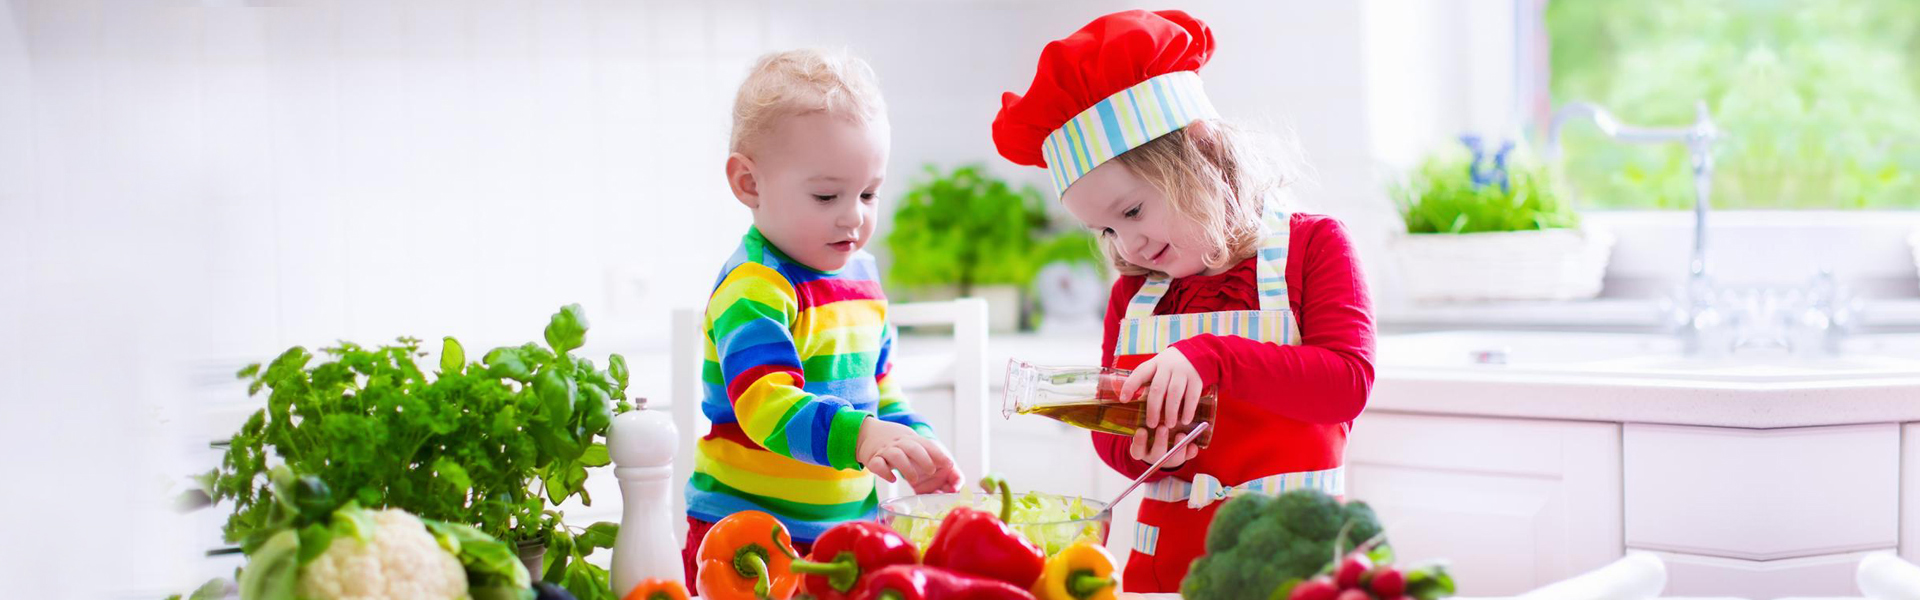 6 Healthy Foods Your Child will Love